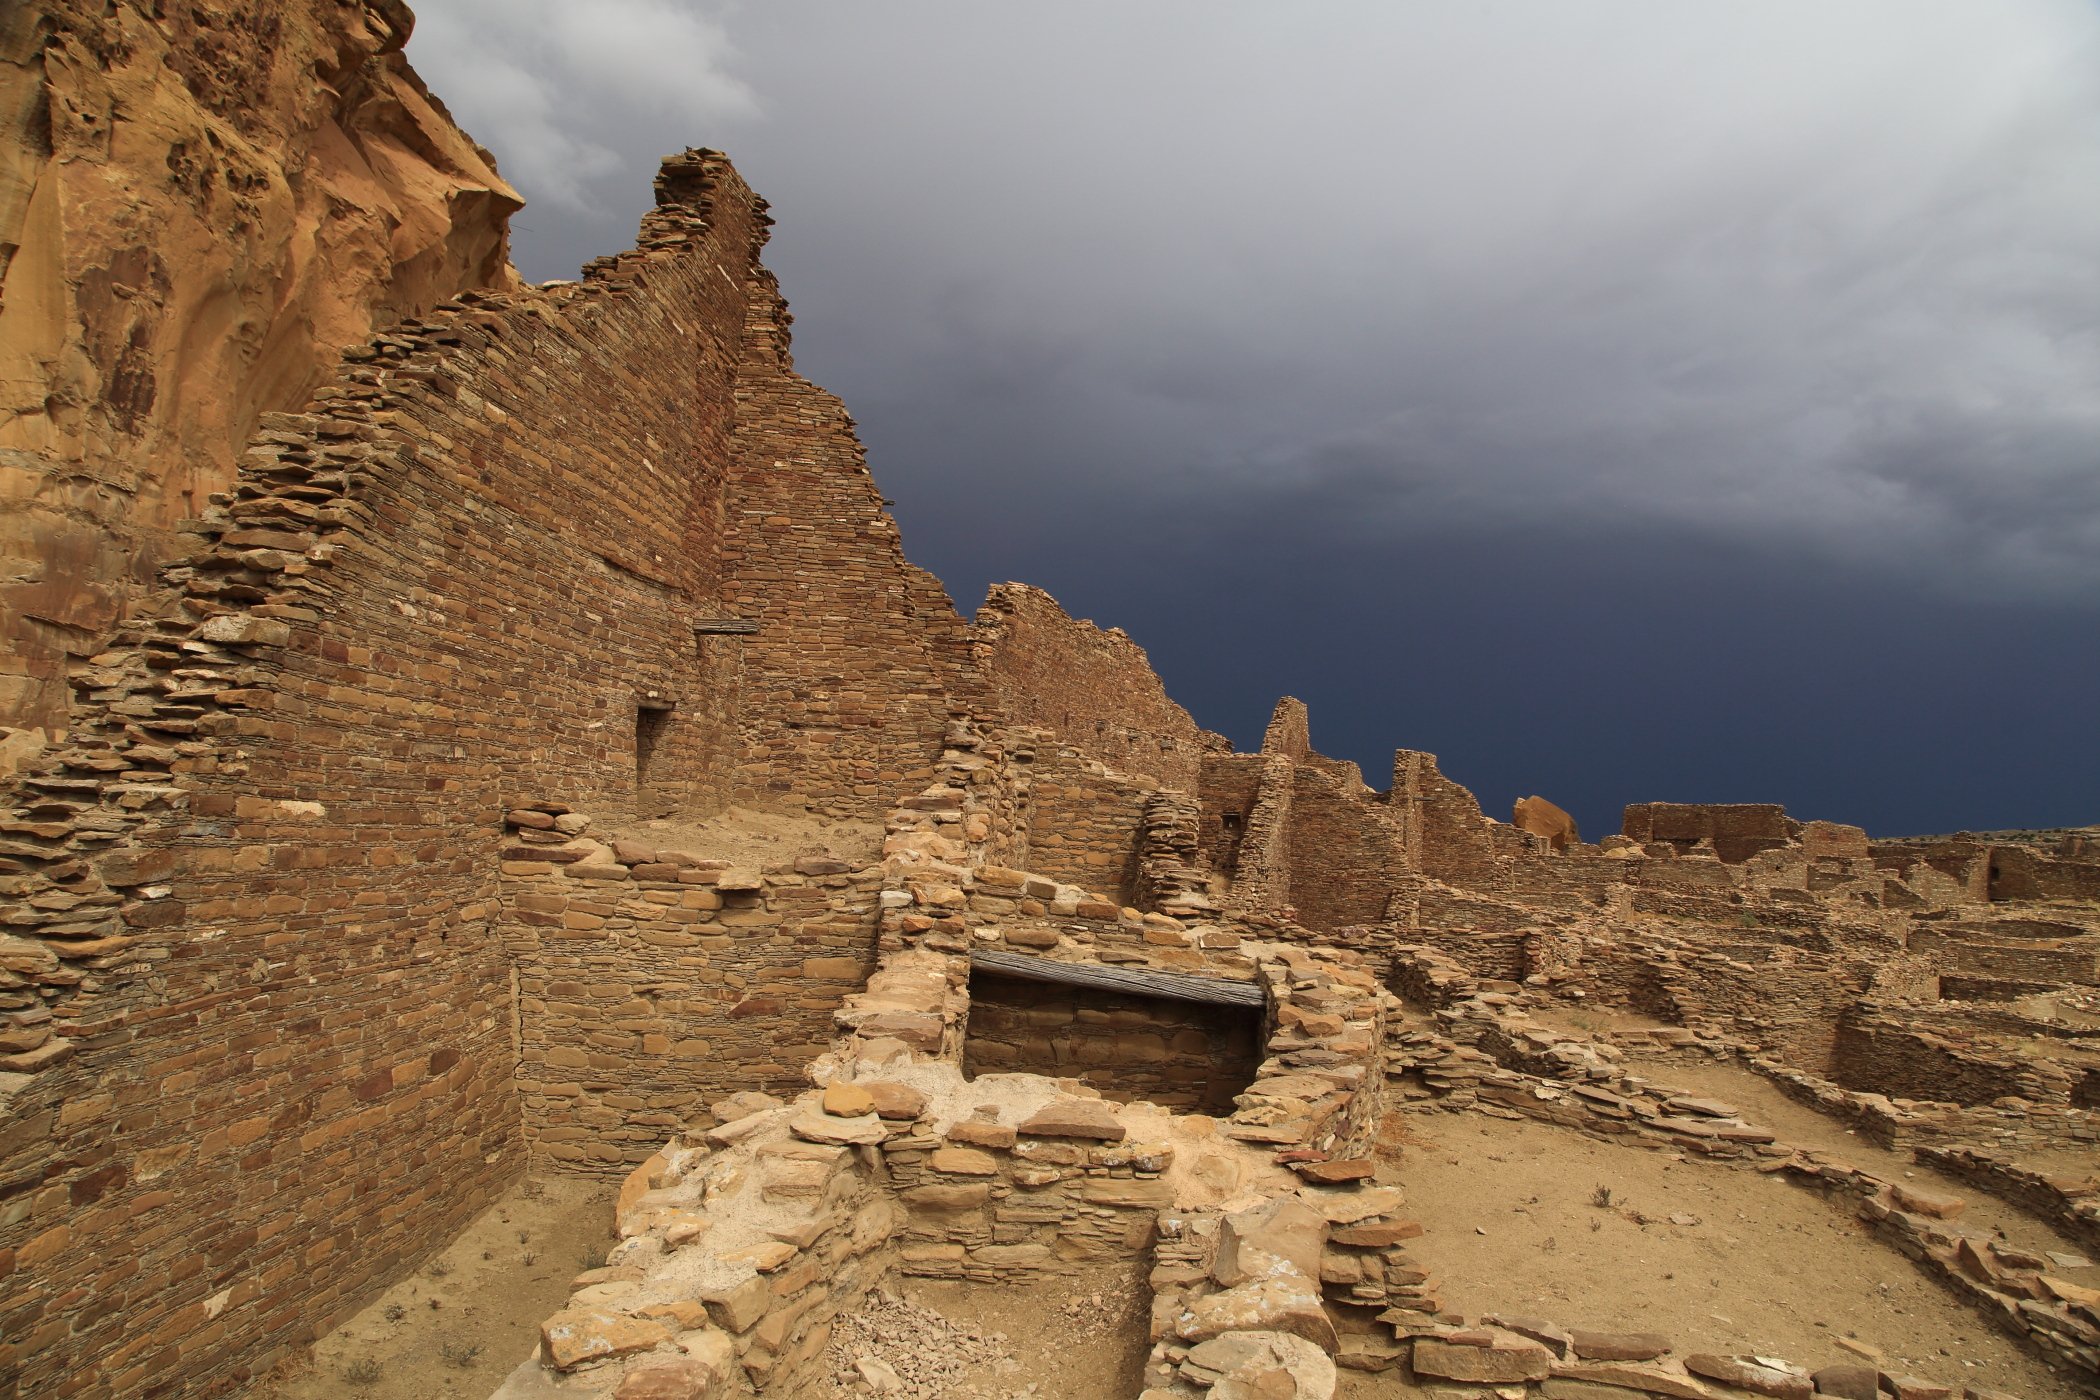 Stormy sky frames ruins of the Pueblo Bonito great house, once five-stories tall, in Chaco Culture National Historical Park in northwest New Mexico.